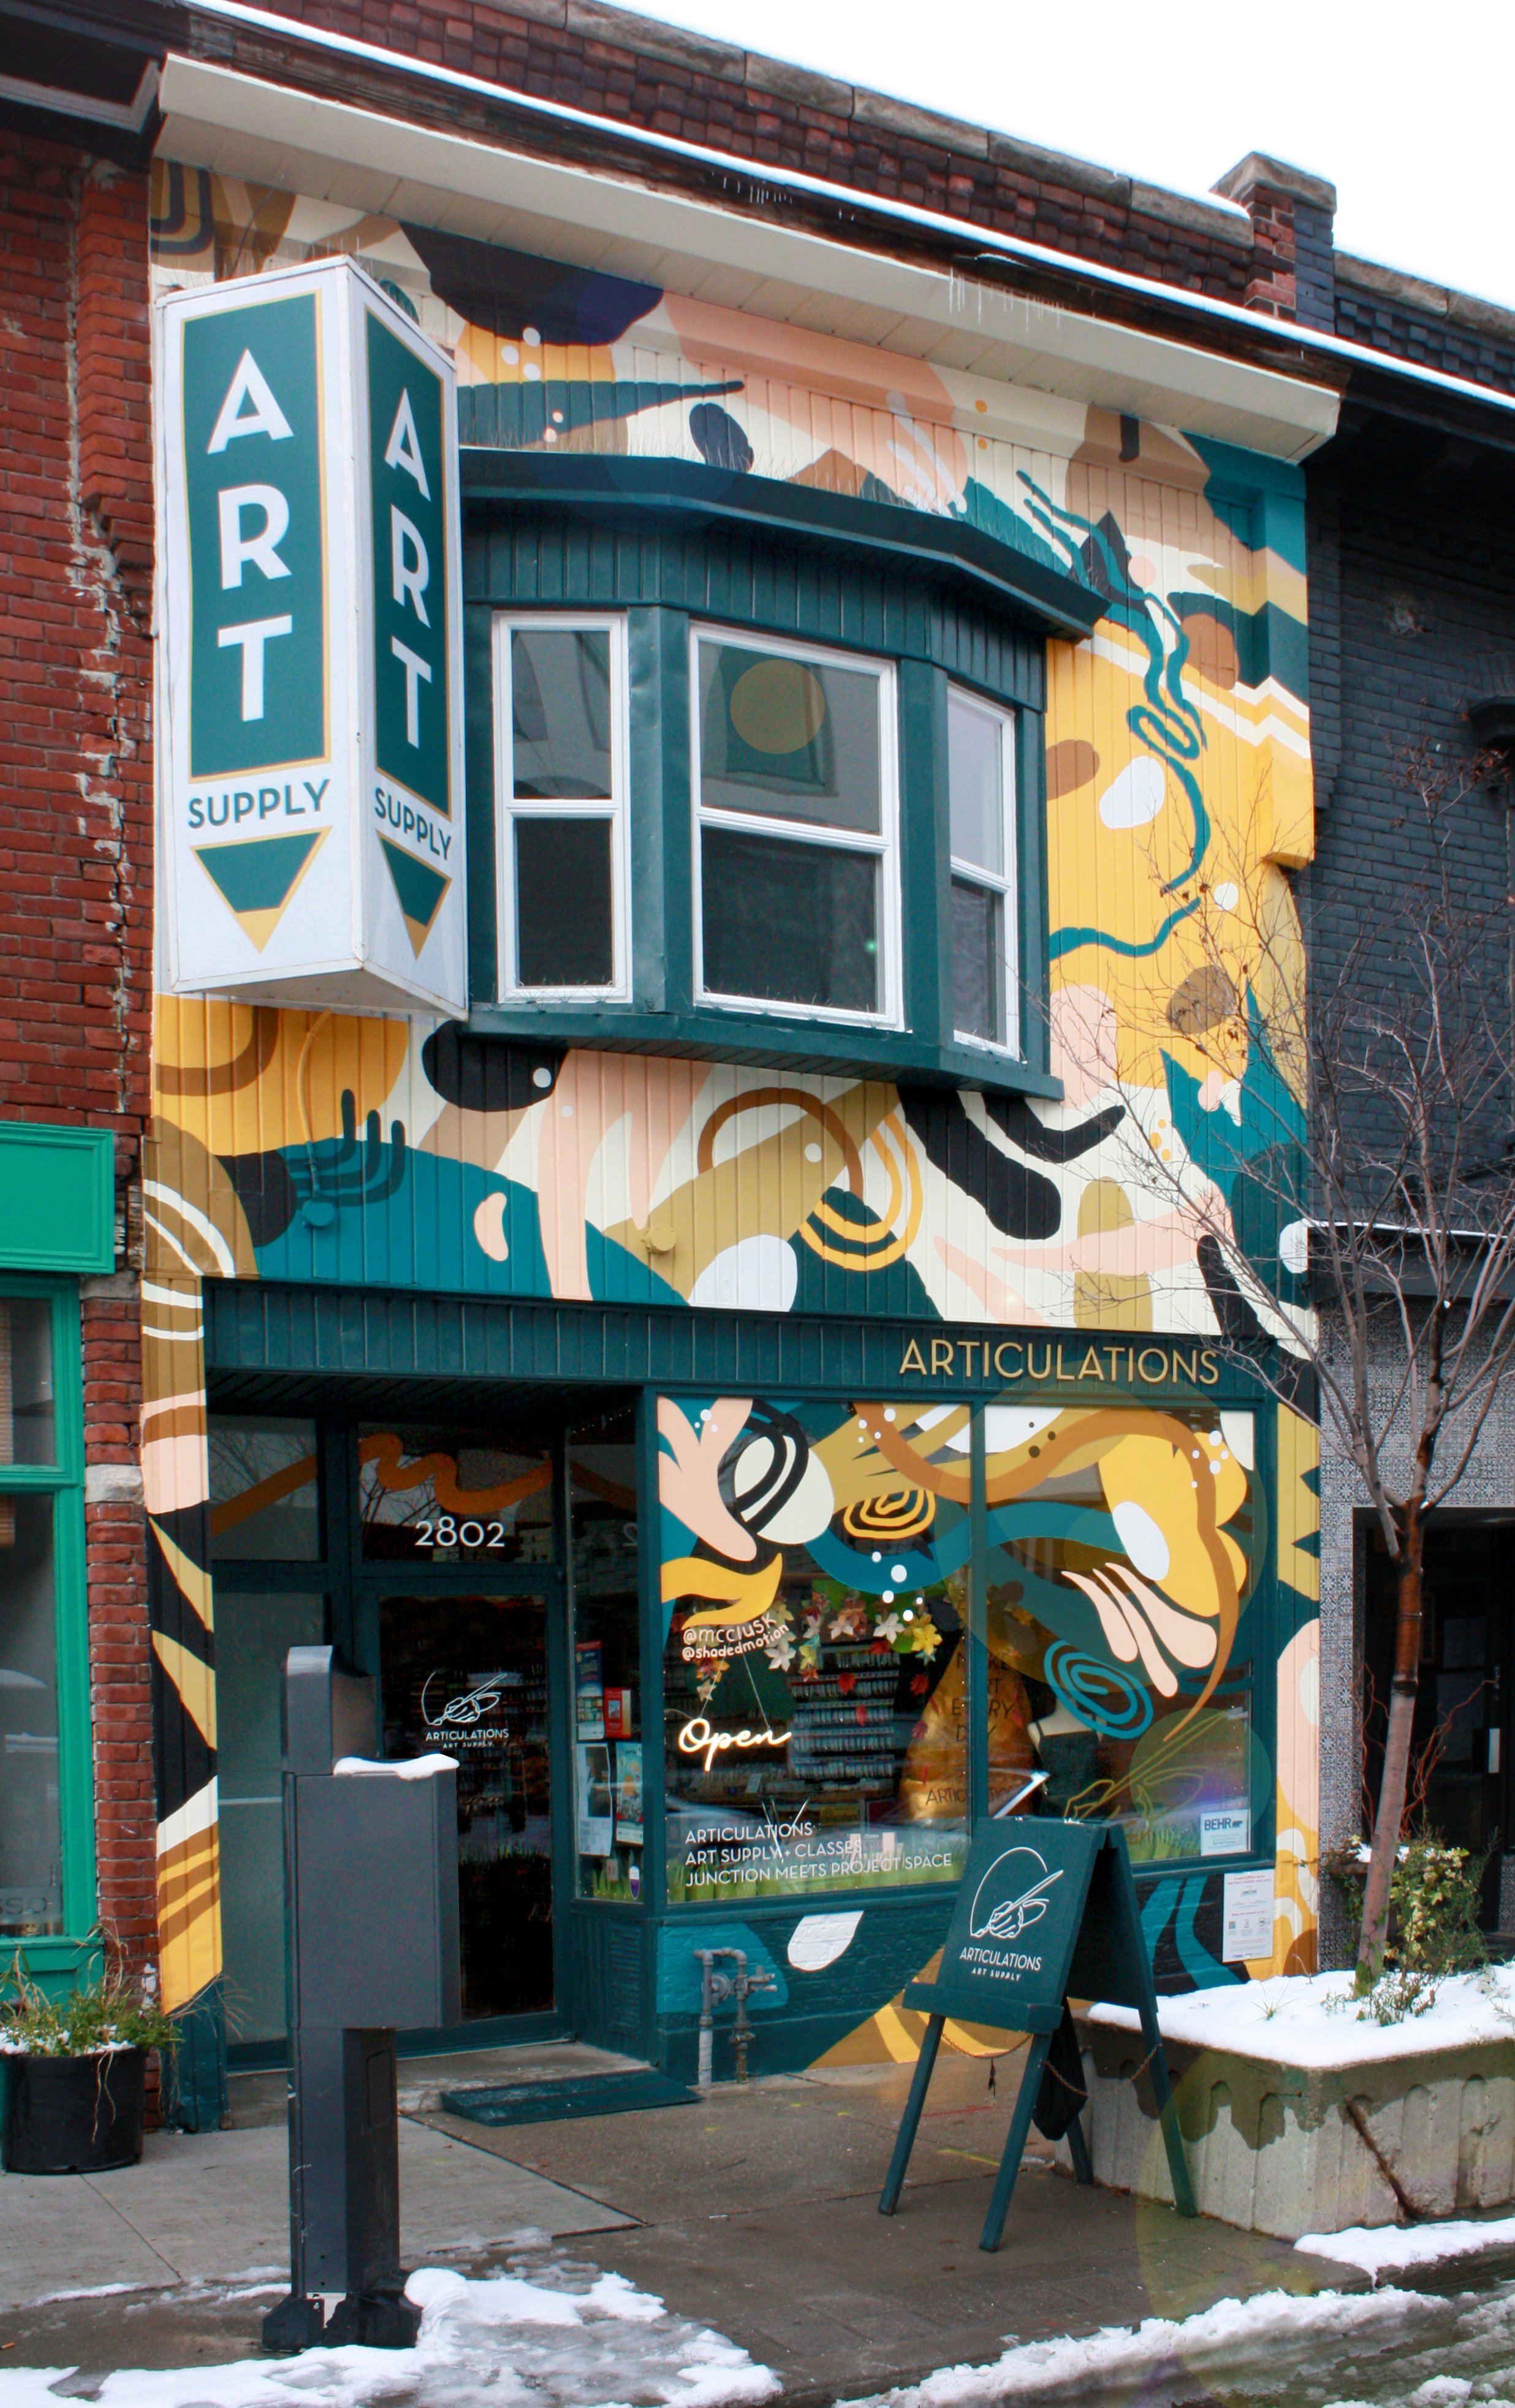   A photo of the art store “Articulations”. Erin painted the facade in a mural of fun swirling abstract shapes in muted tones.  